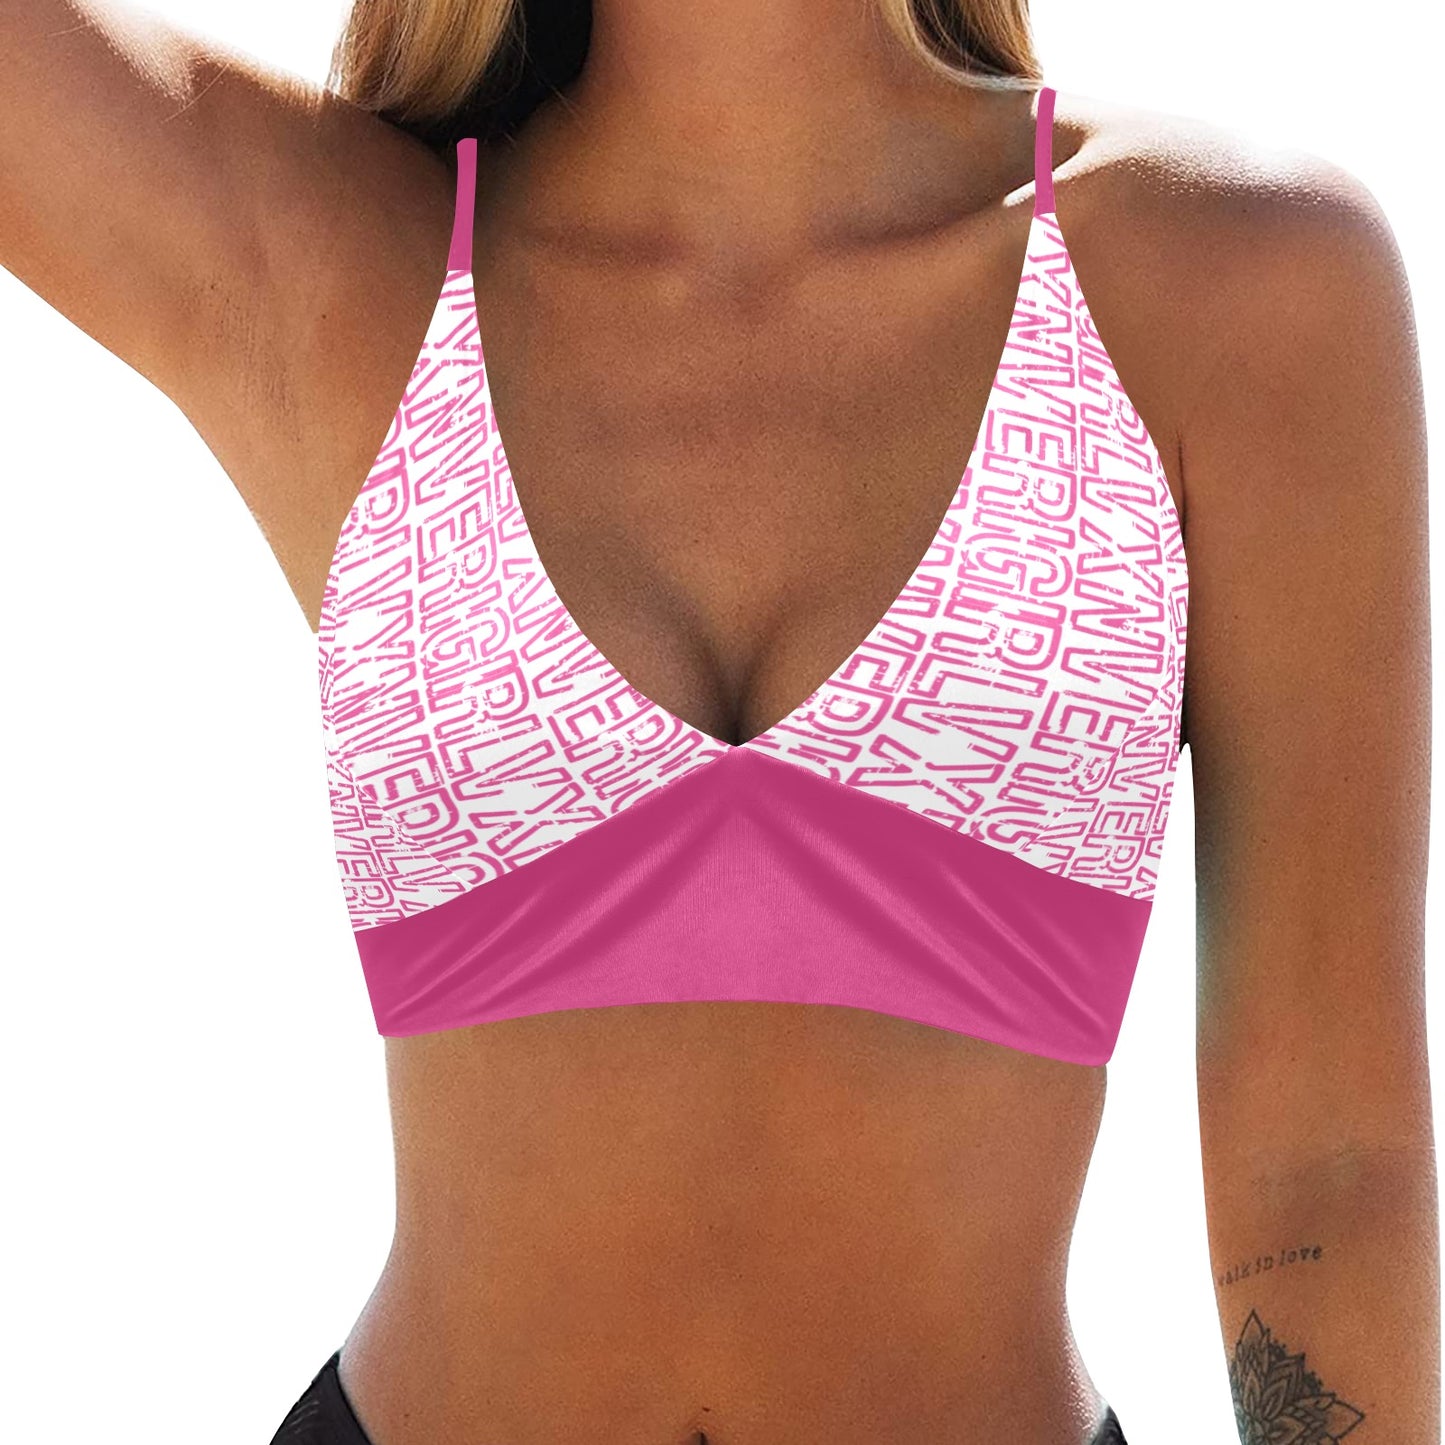 VGVXN White and Pink Crop Top